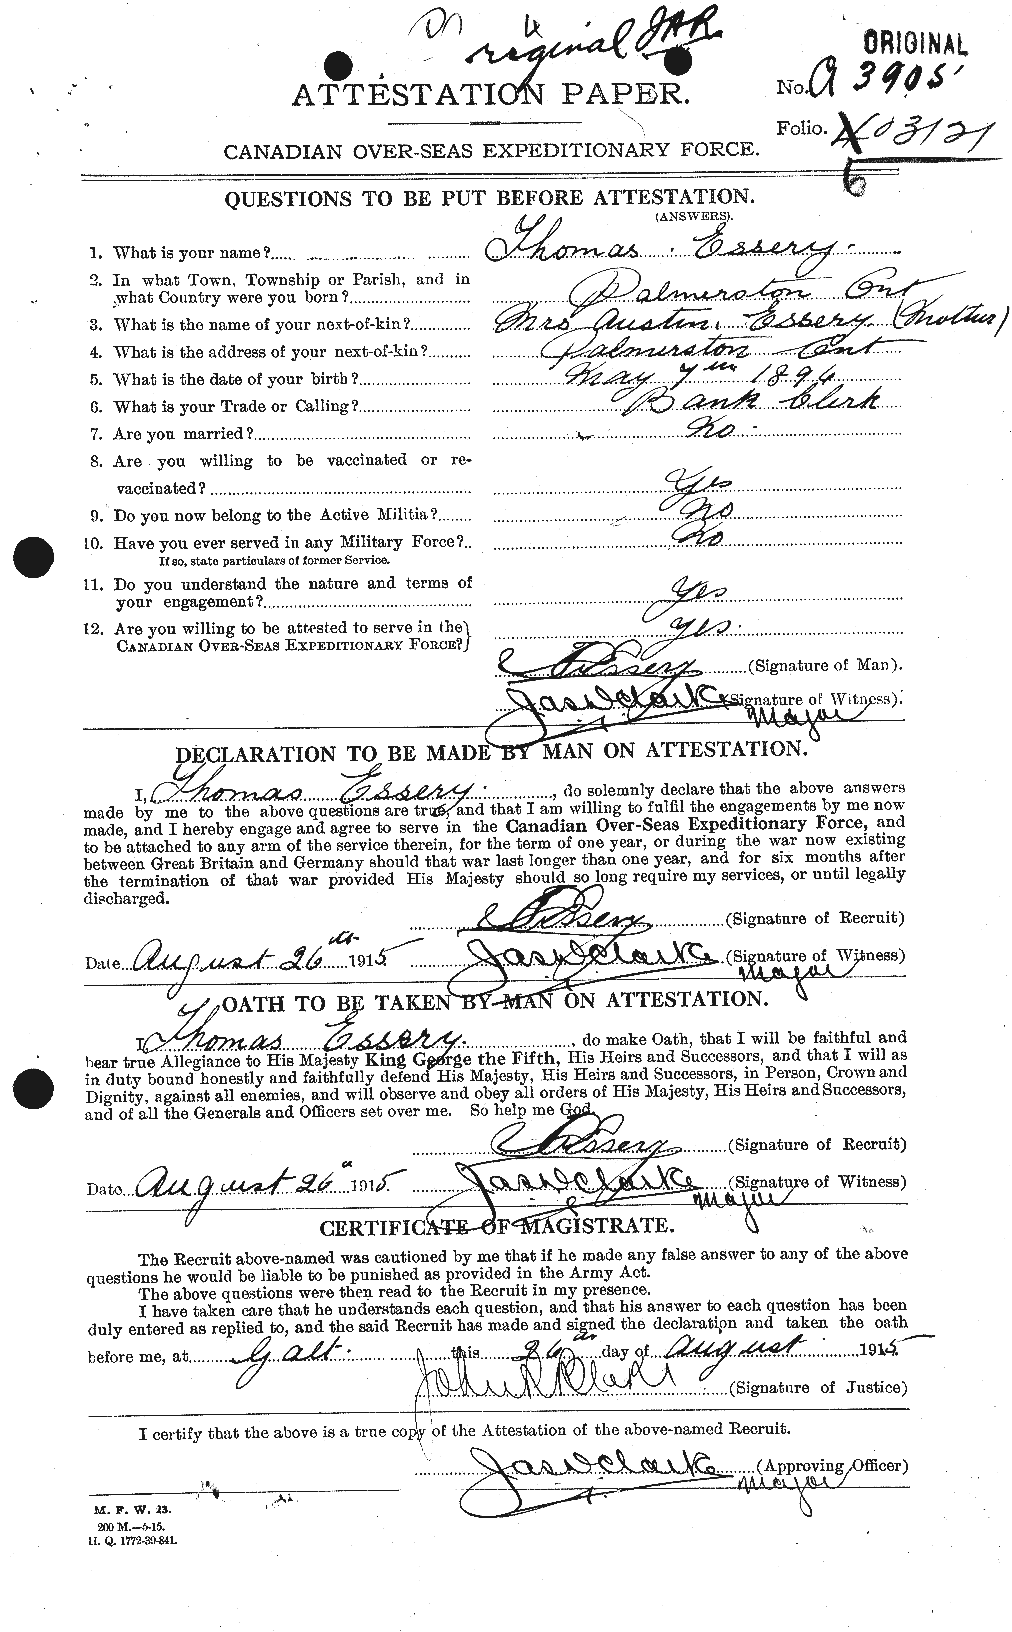 Personnel Records of the First World War - CEF 316678a